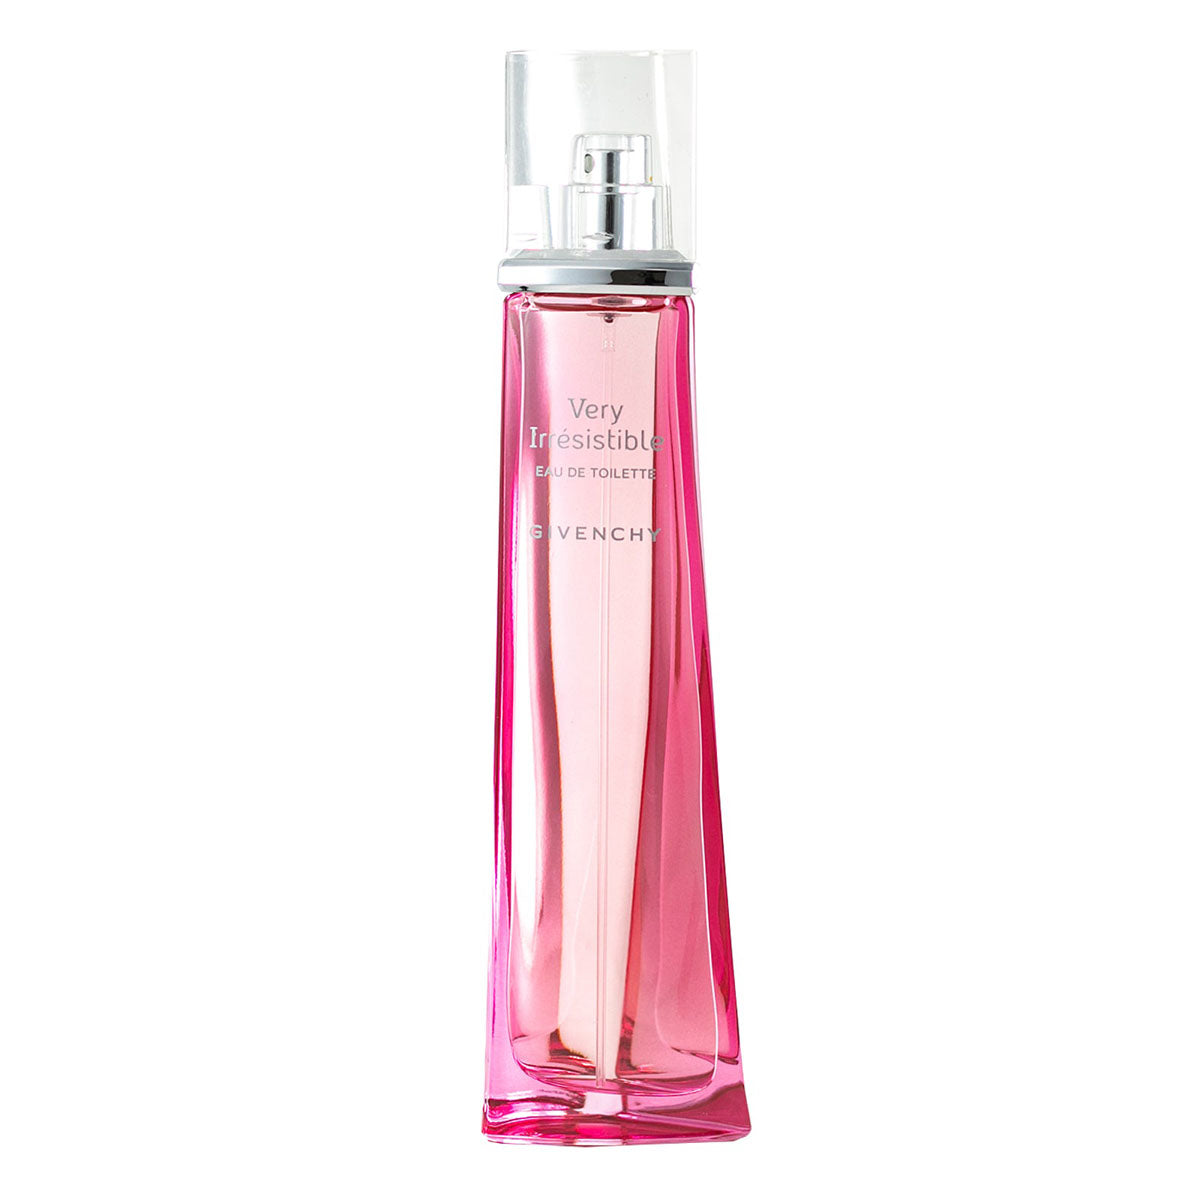 Givenchy Very Irresistible 75ml Eau de Toilette Para Mujer